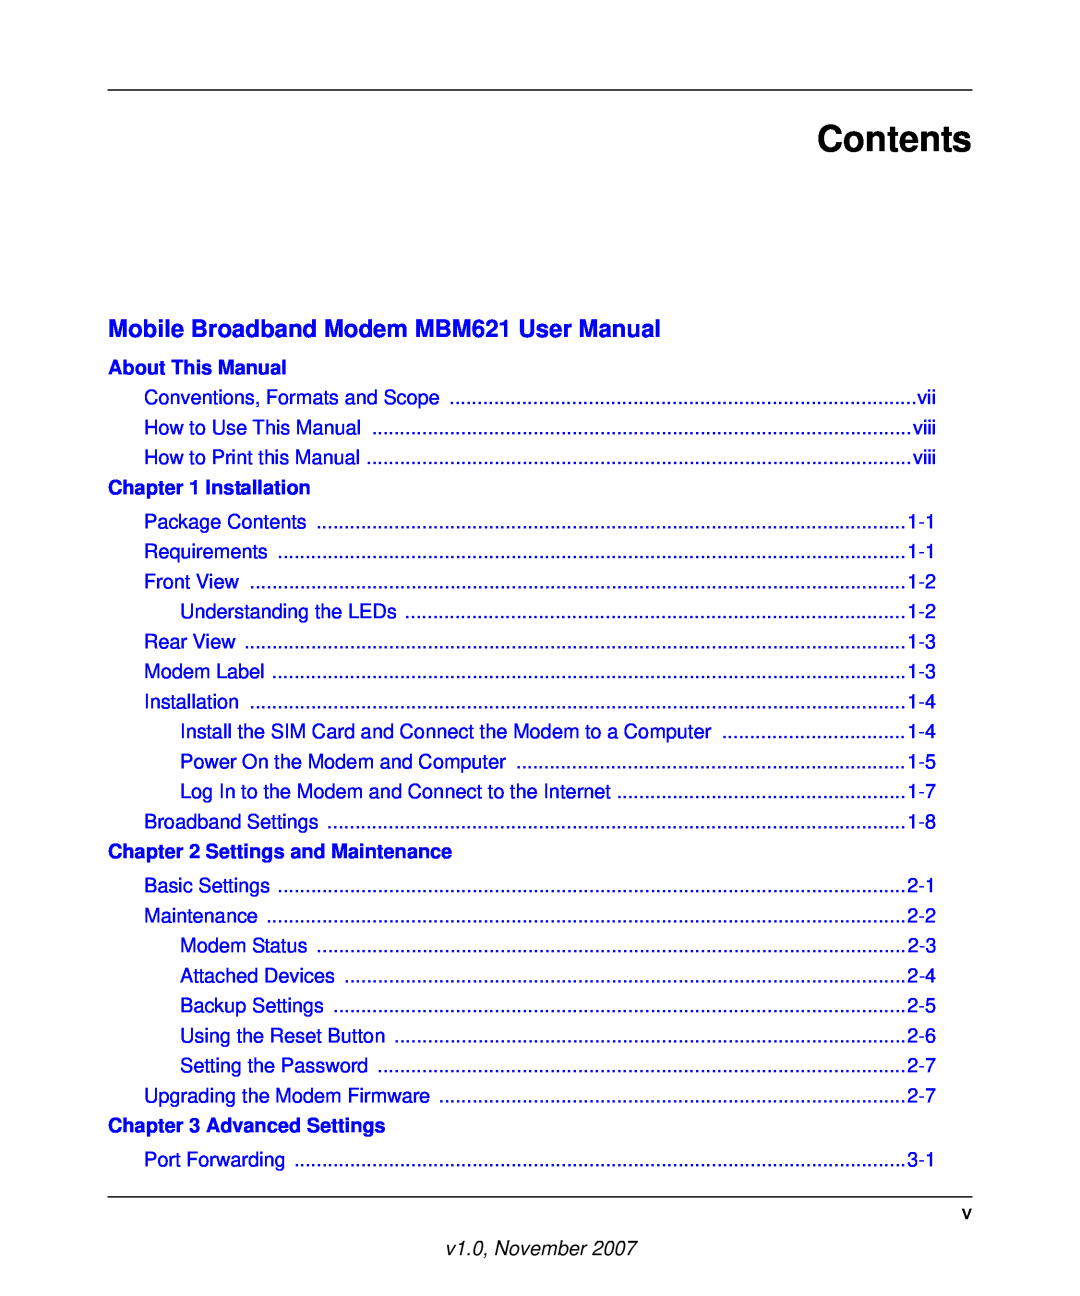 NETGEAR Contents, Mobile Broadband Modem MBM621 User Manual, About This Manual, Installation, Settings and Maintenance 